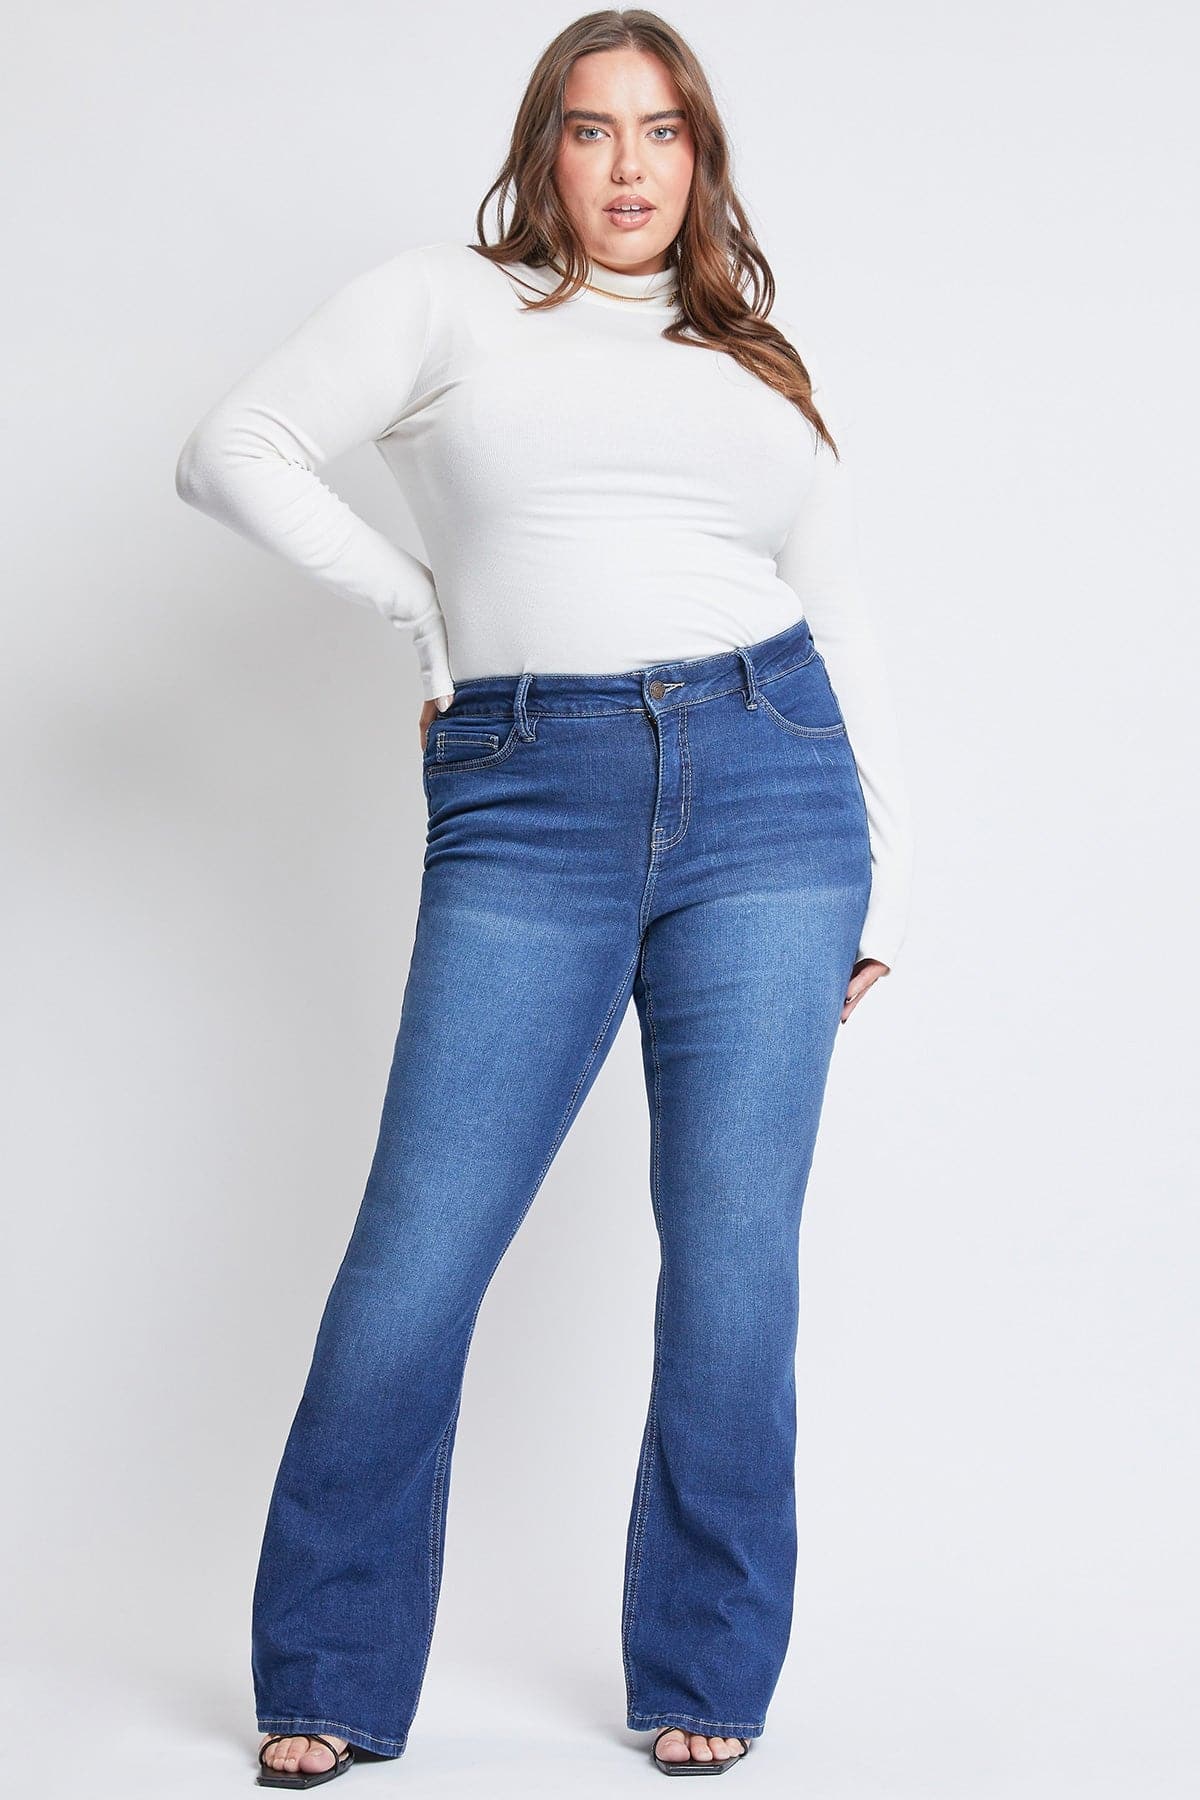 Women¨s Plus Sustainable Mid-Rise Bootcut Jean